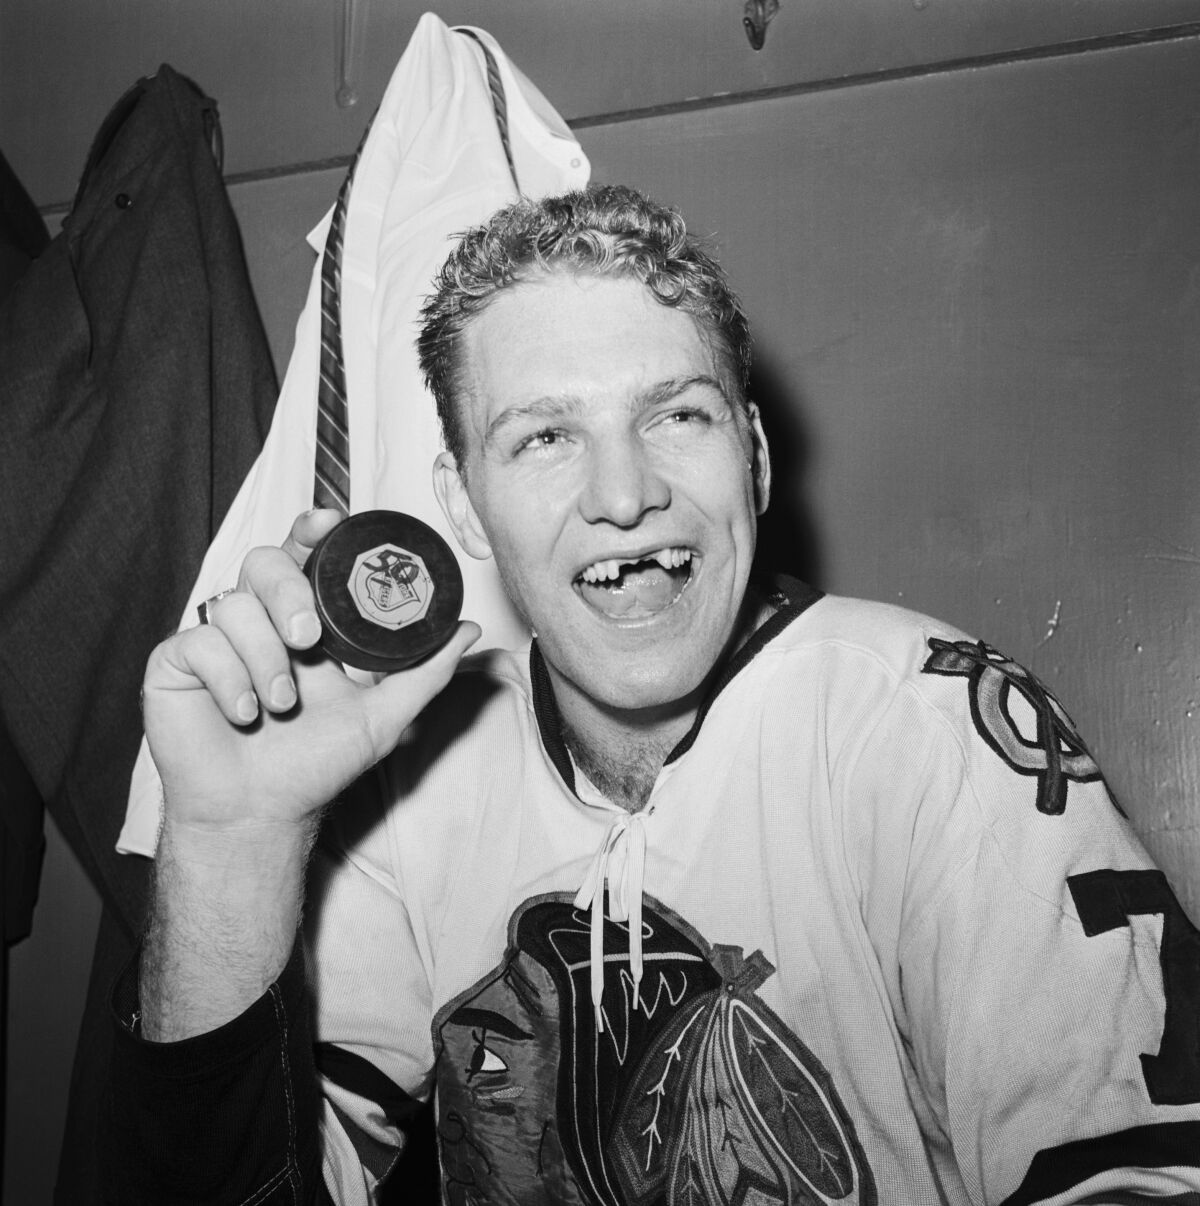 A grinning Bobby Hull, forward for the Chicago Blackhawks.